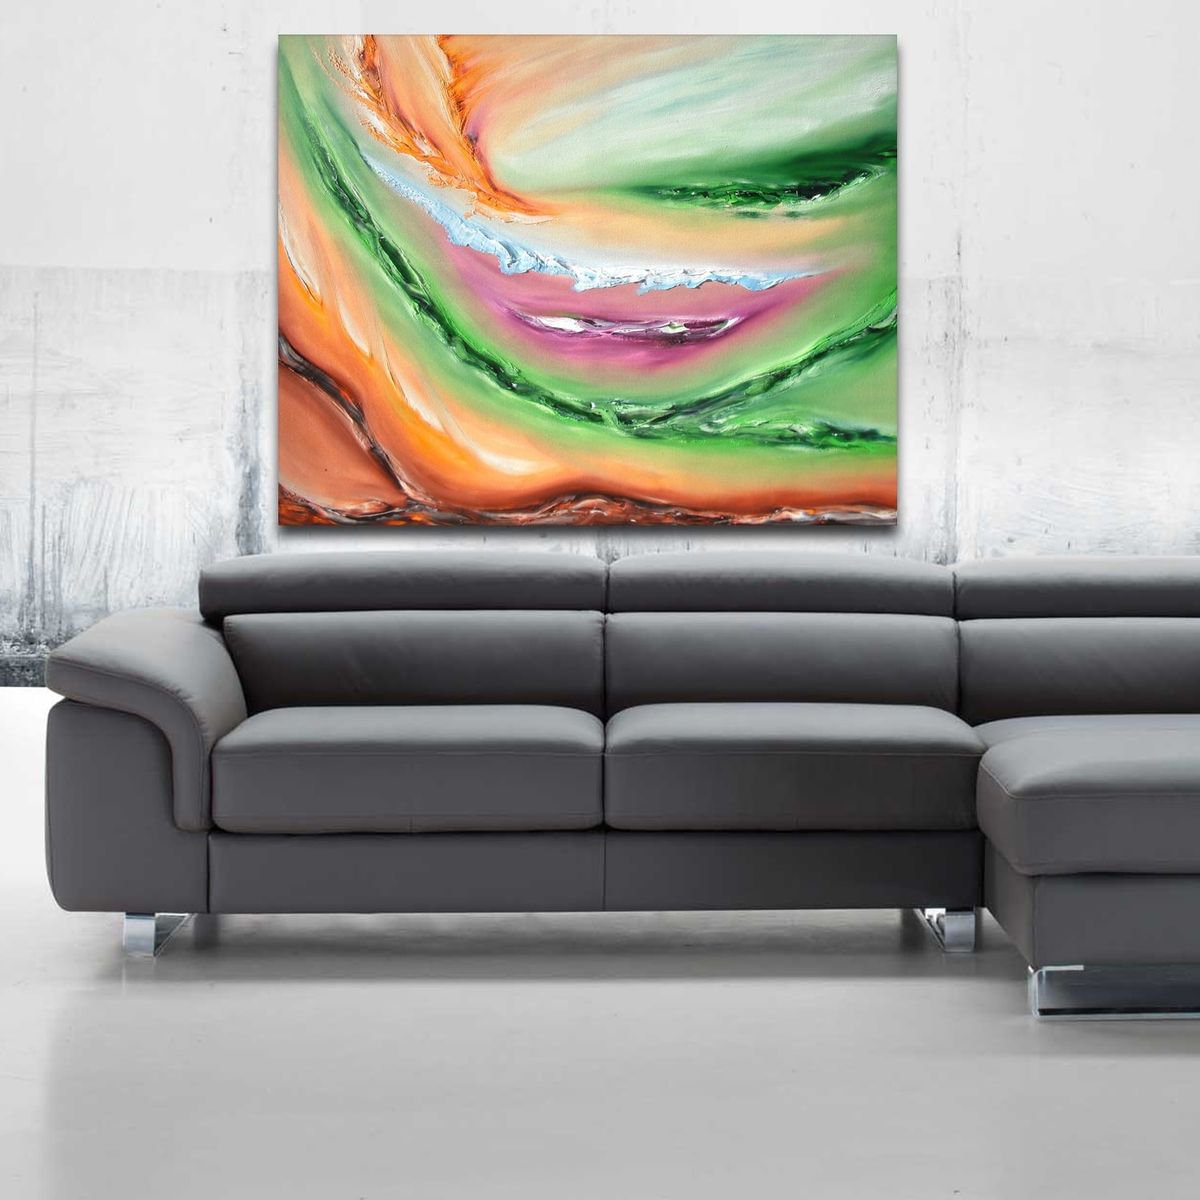 Visionary, LARGE XXL, 100x80 cm, Original abstract oil painting by Davide De Palma